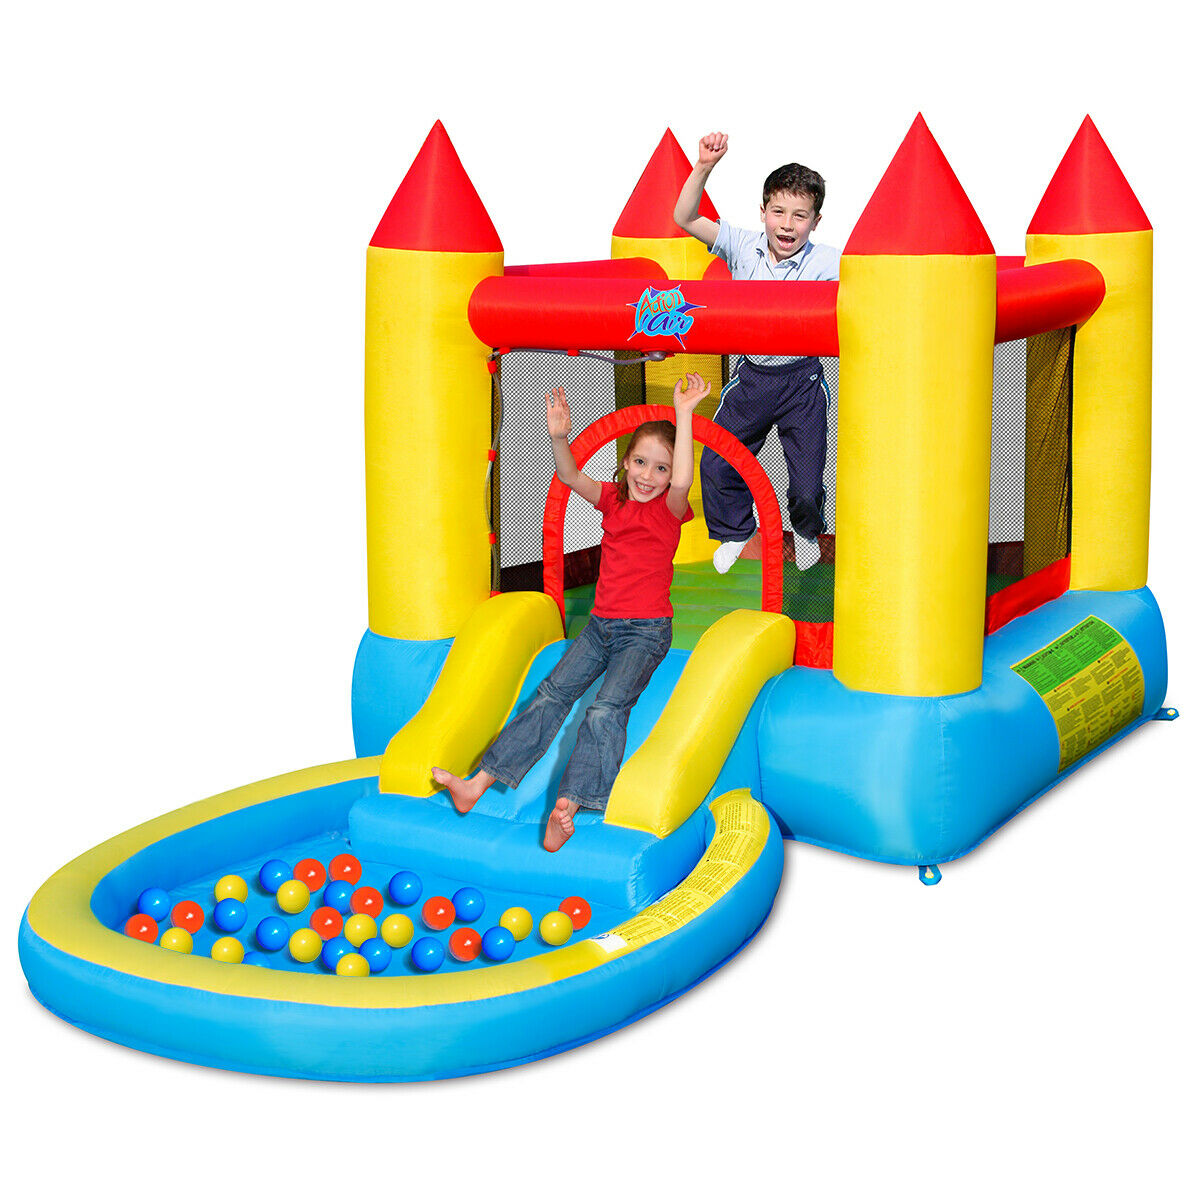 Gymax Inflatable Bounce House Kids Slide Jumping Castle Bouncer w/Pool and 480W Blower - image 2 of 10